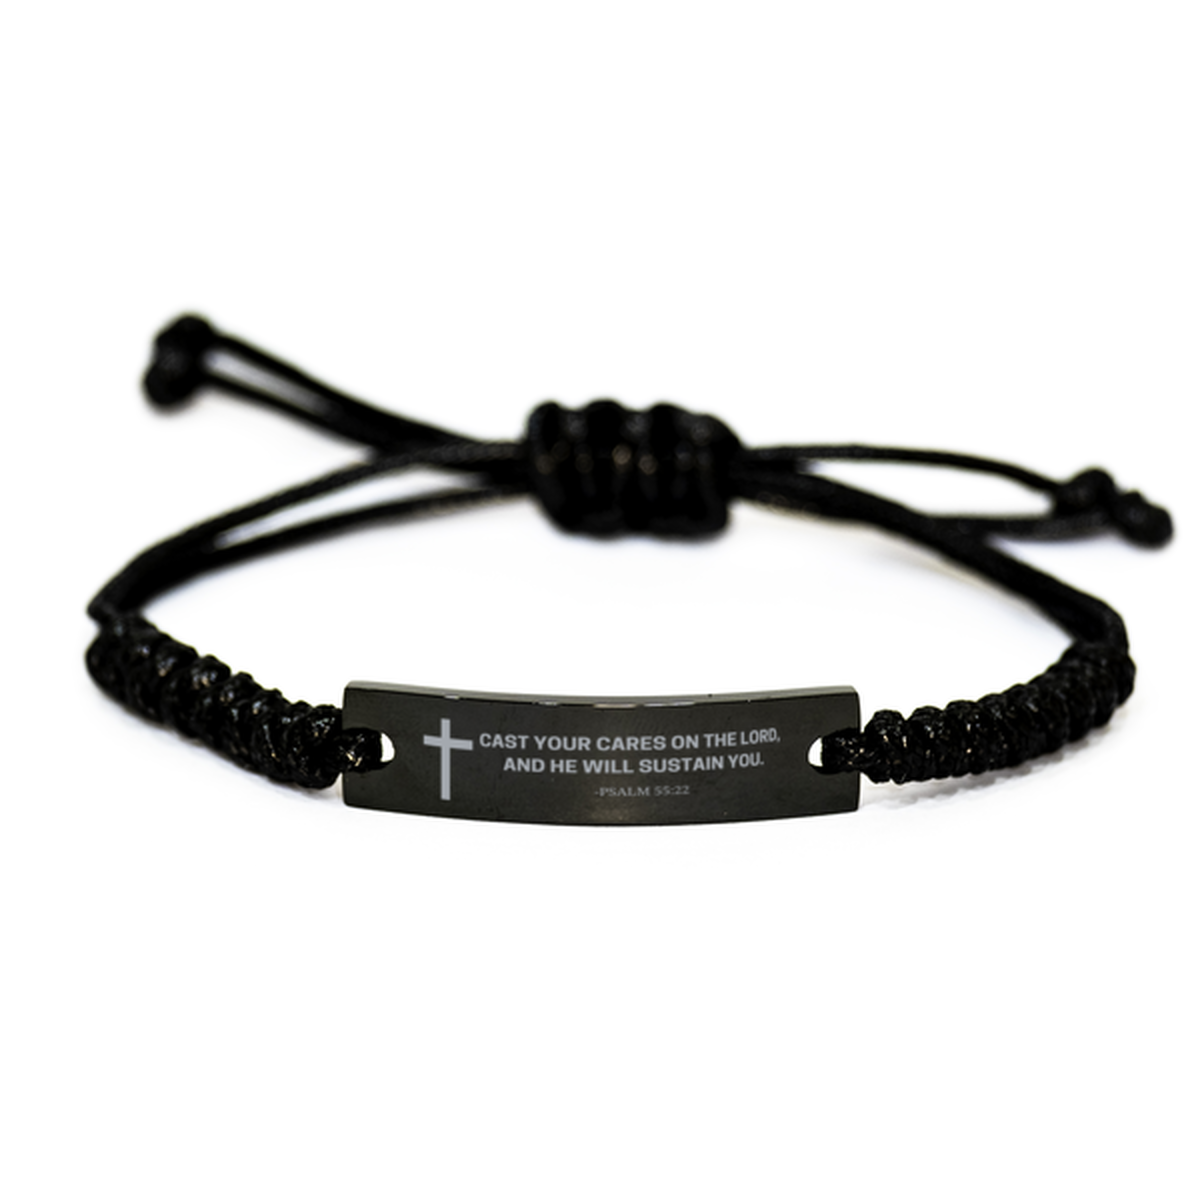 Baptism Gifts For Teenage Boys Girls, Christian Bible Verse Black Rope Bracelet, Cast your cares on the Lord, Catholic Confirmation Gifts for Son, Godson, Grandson, Nephew